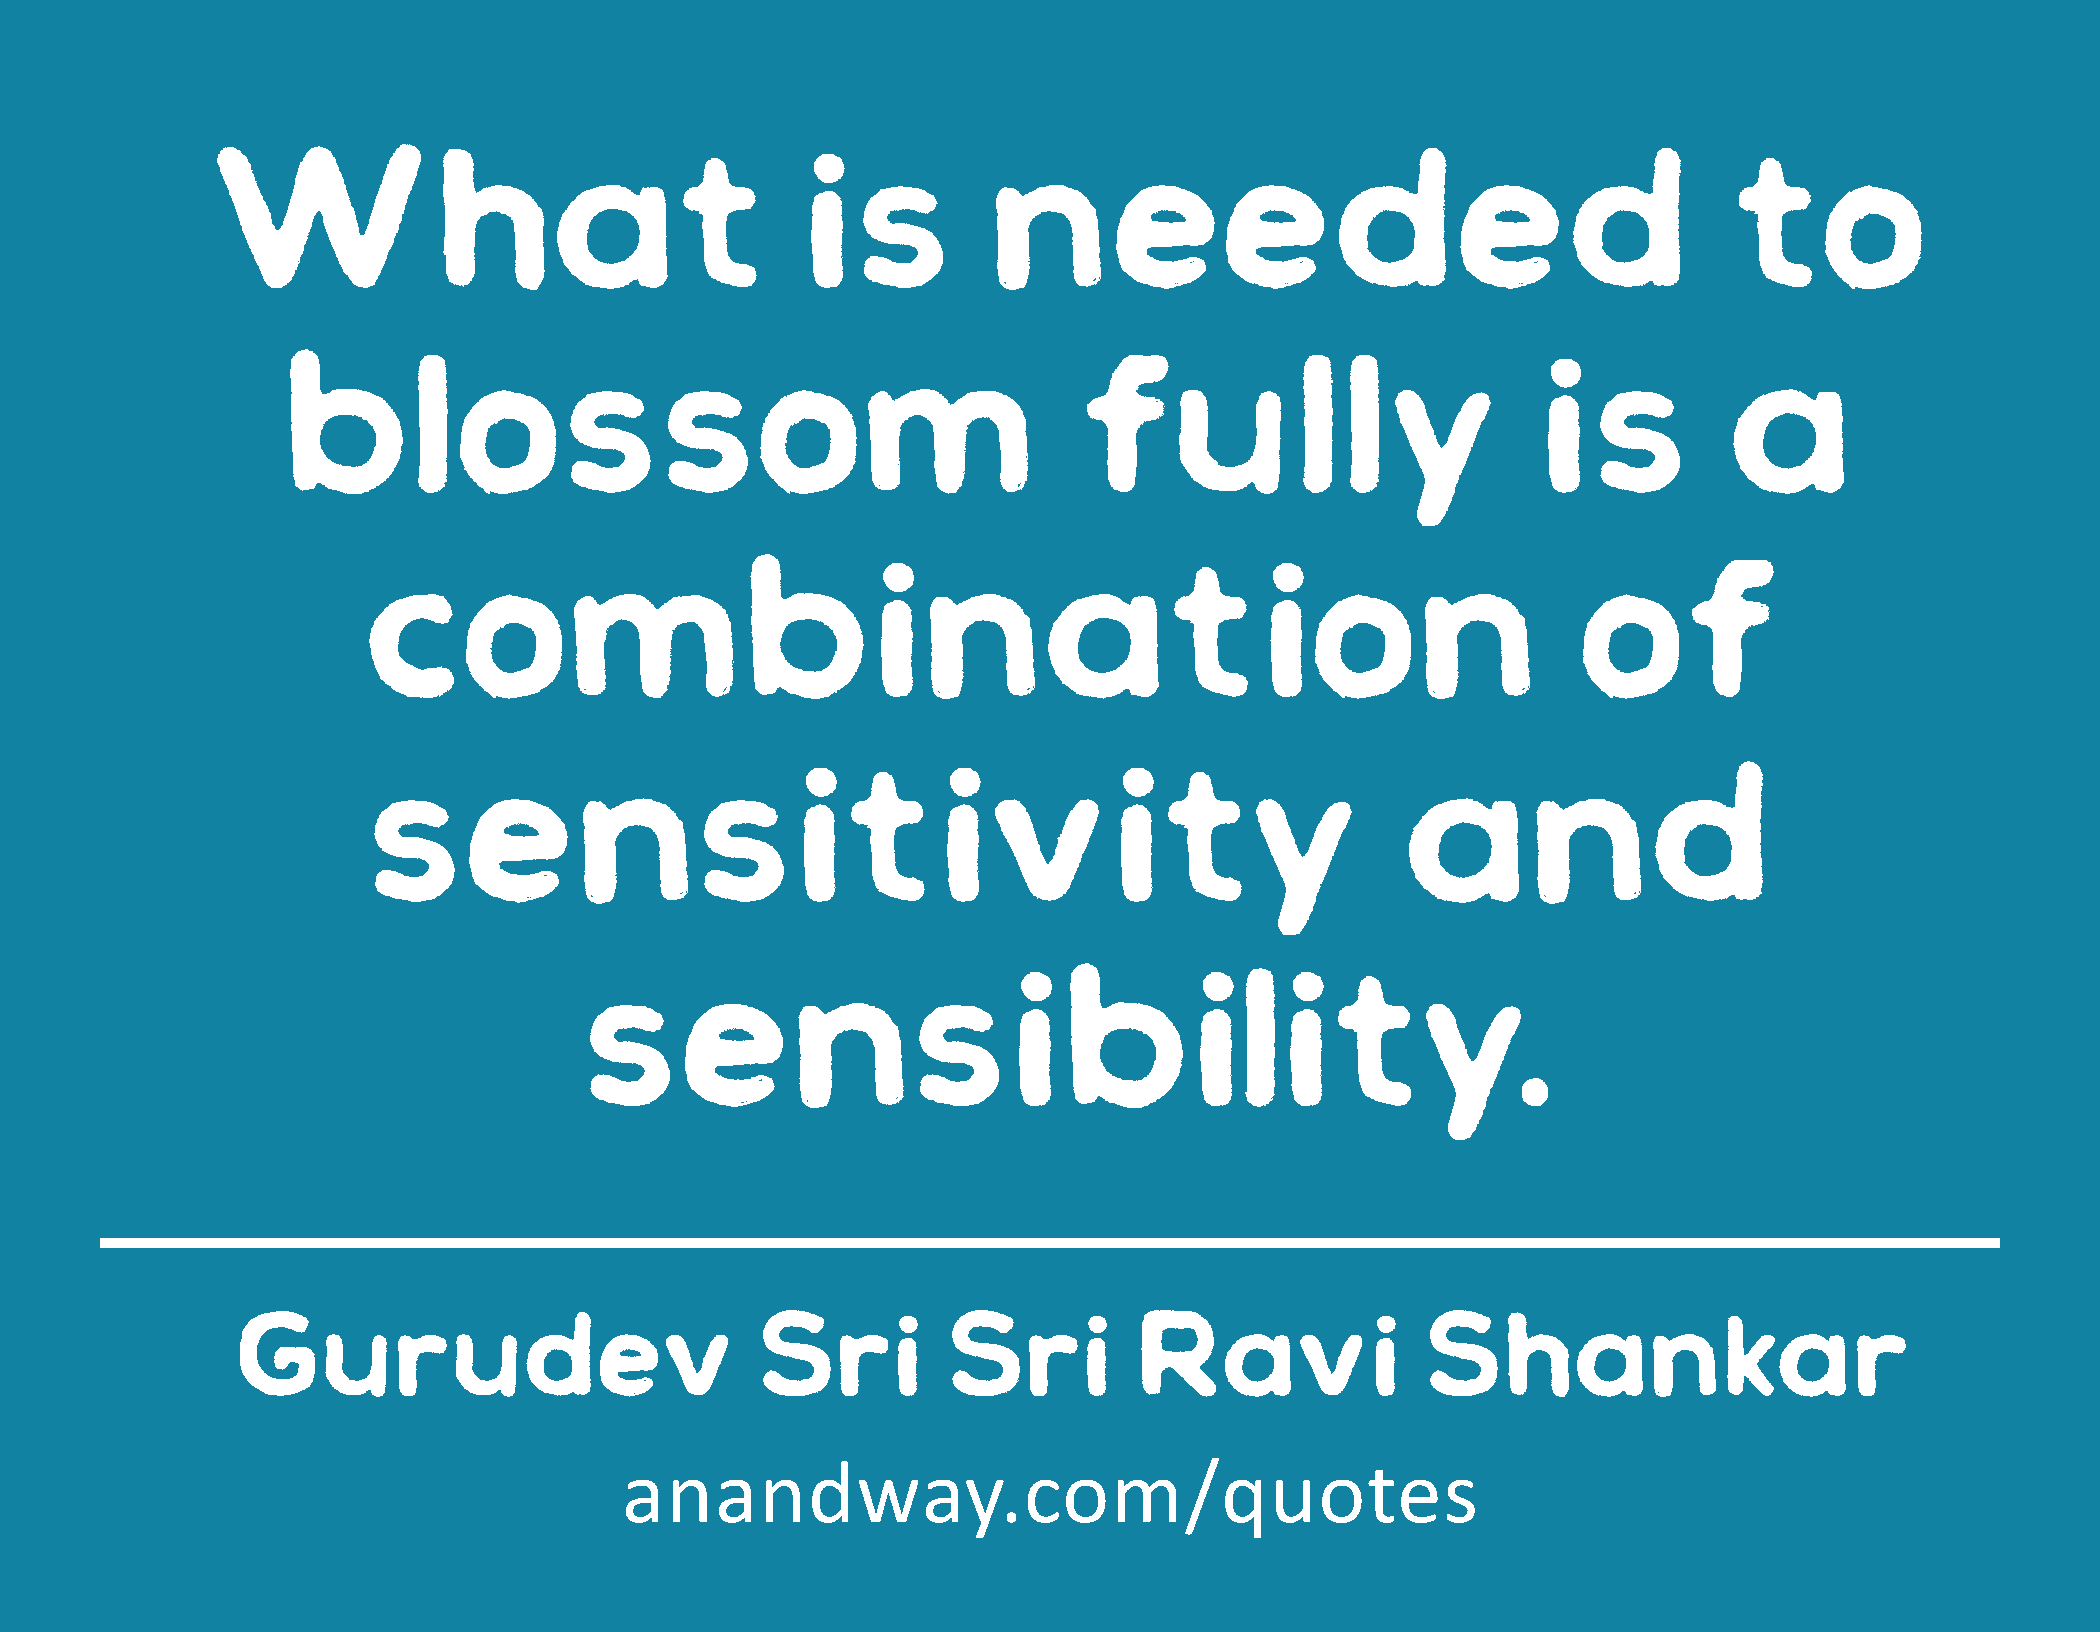 What is needed to blossom fully is a combination of sensitivity and sensibility. 
 -Gurudev Sri Sri Ravi Shankar